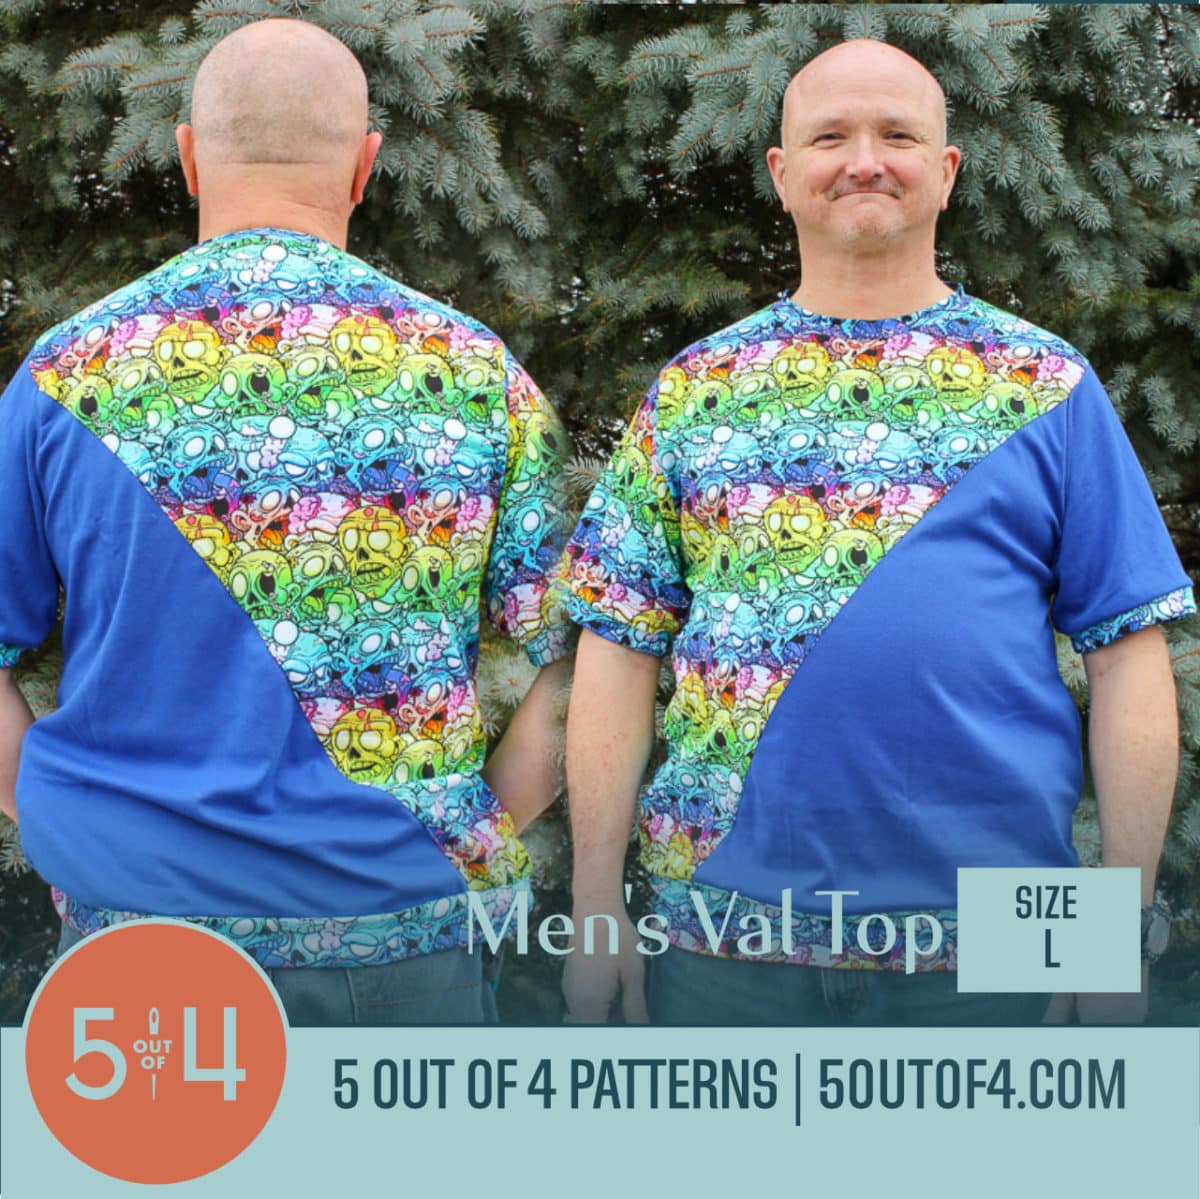 Val Top - 5 out of 4 Patterns